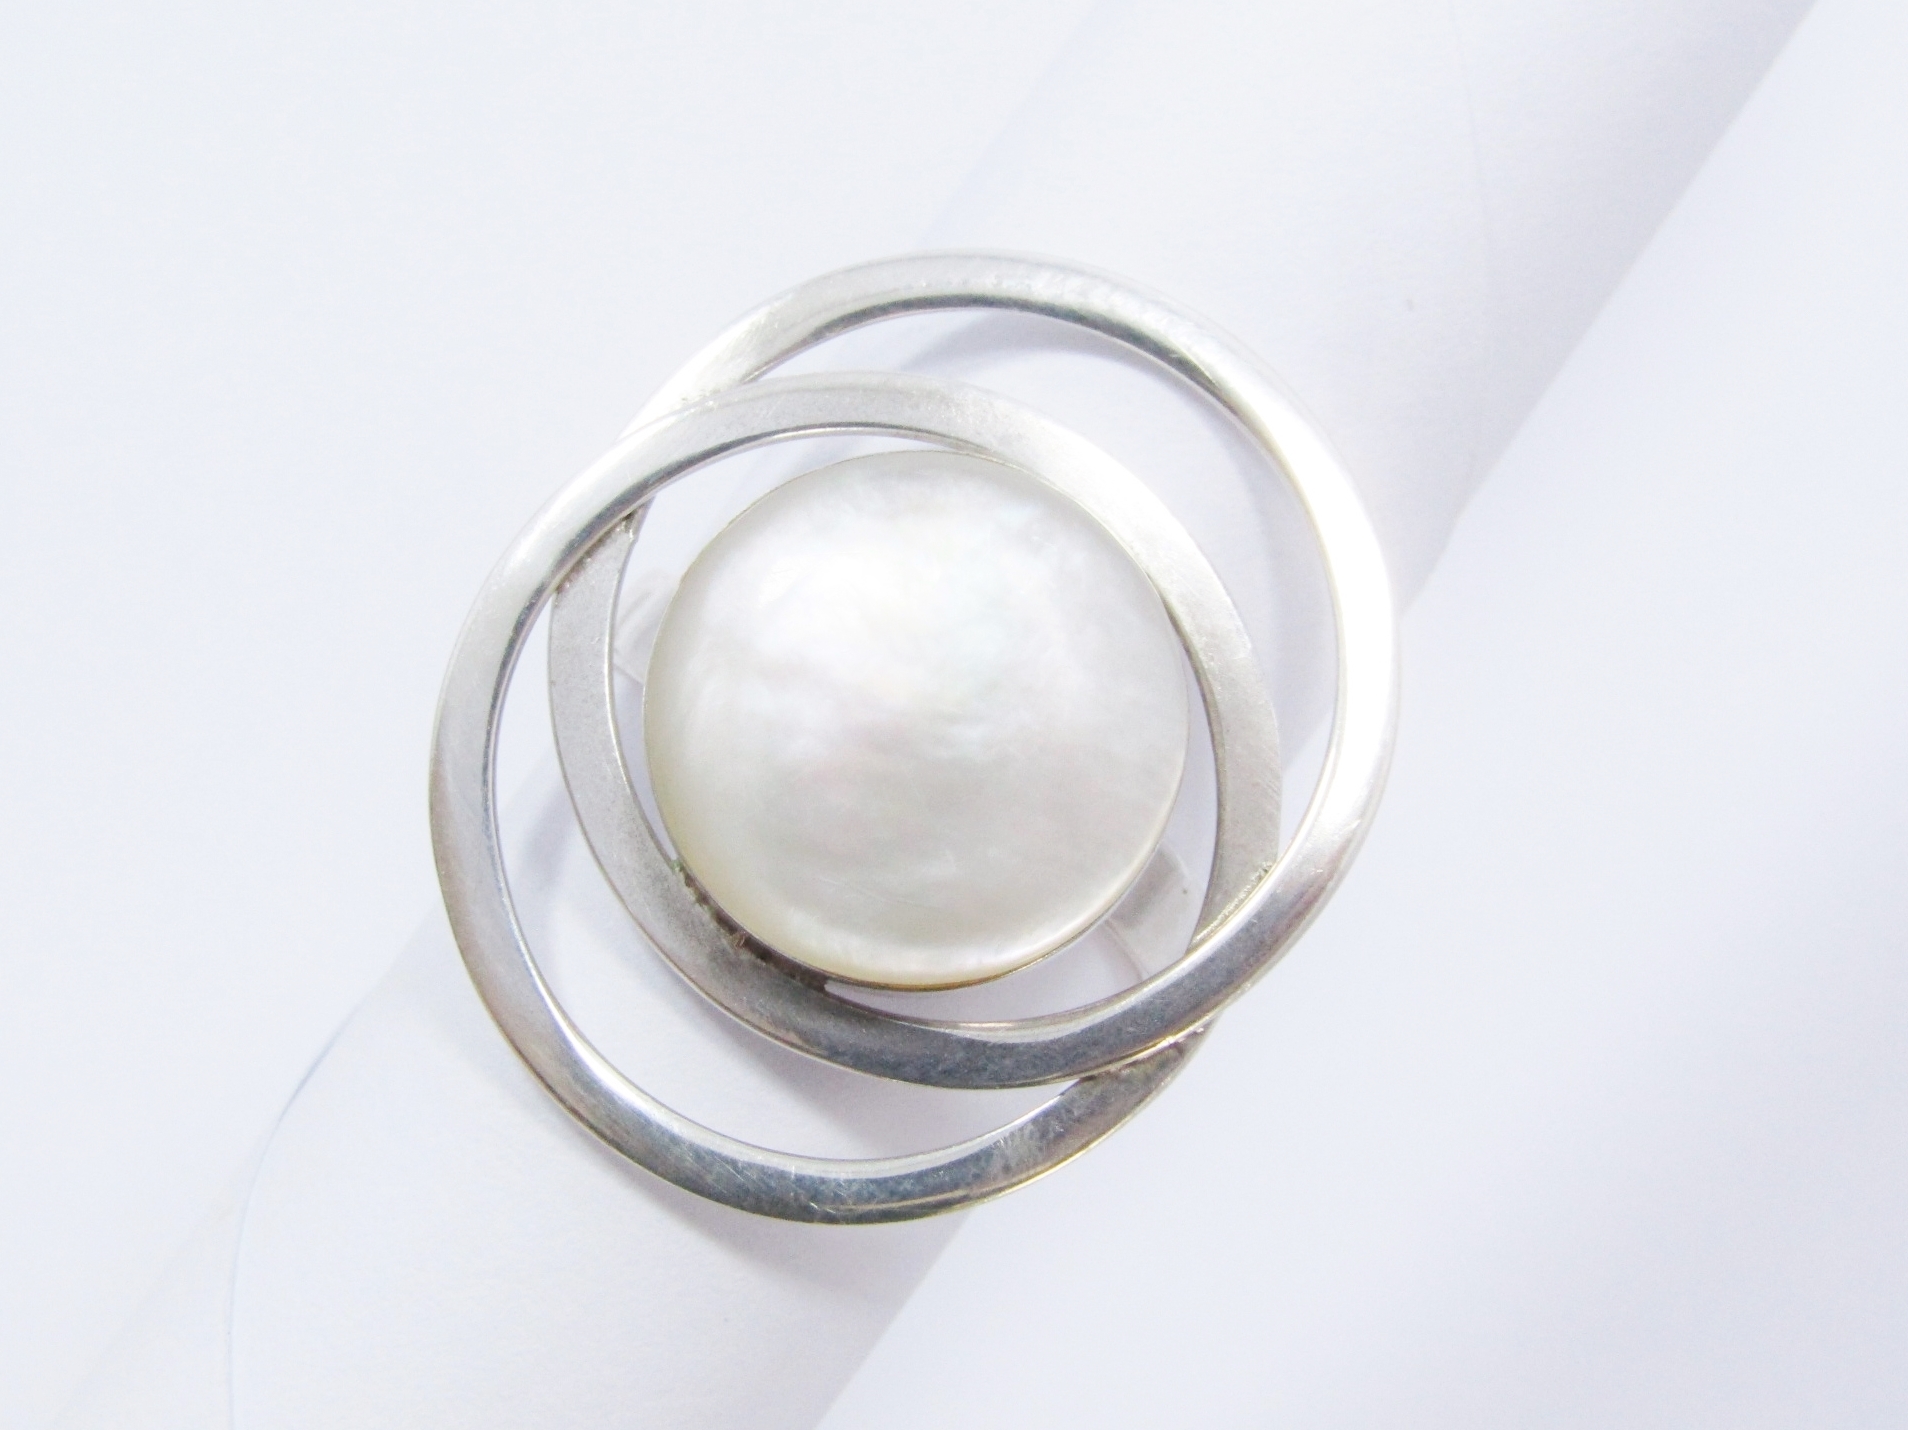 A Lovely Chunky Mother of Pearl Ring With a Open Ended Band in Sterling Silver.